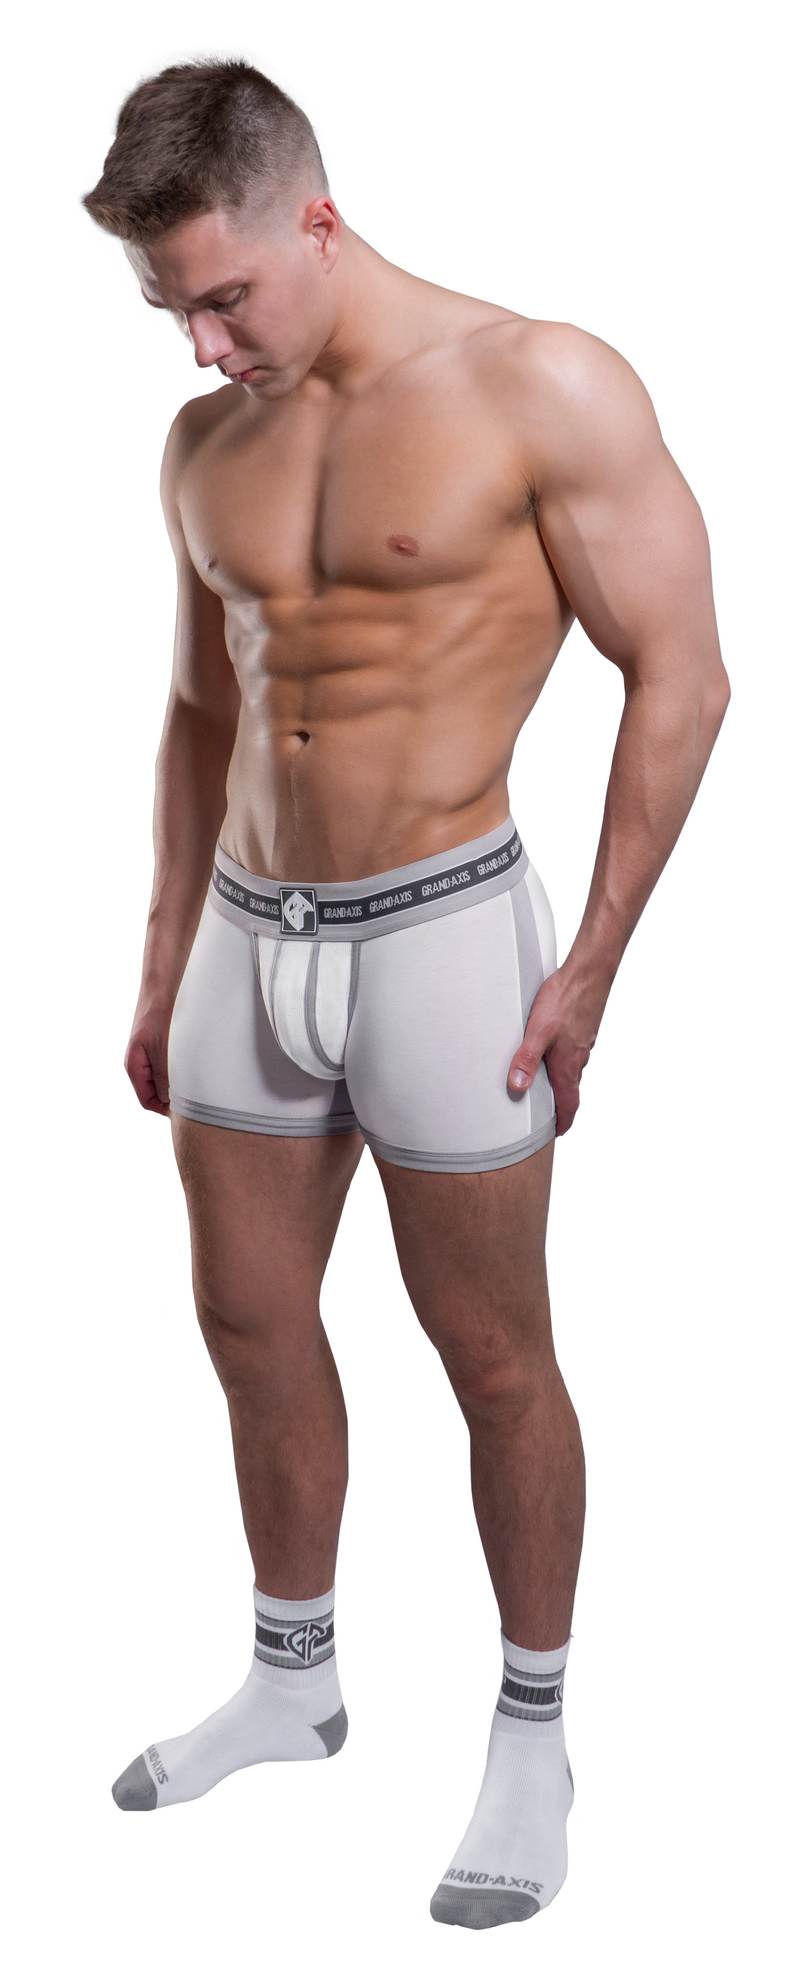 Maxx 5 Pack Hipster Briefs; Style 155834, Grey